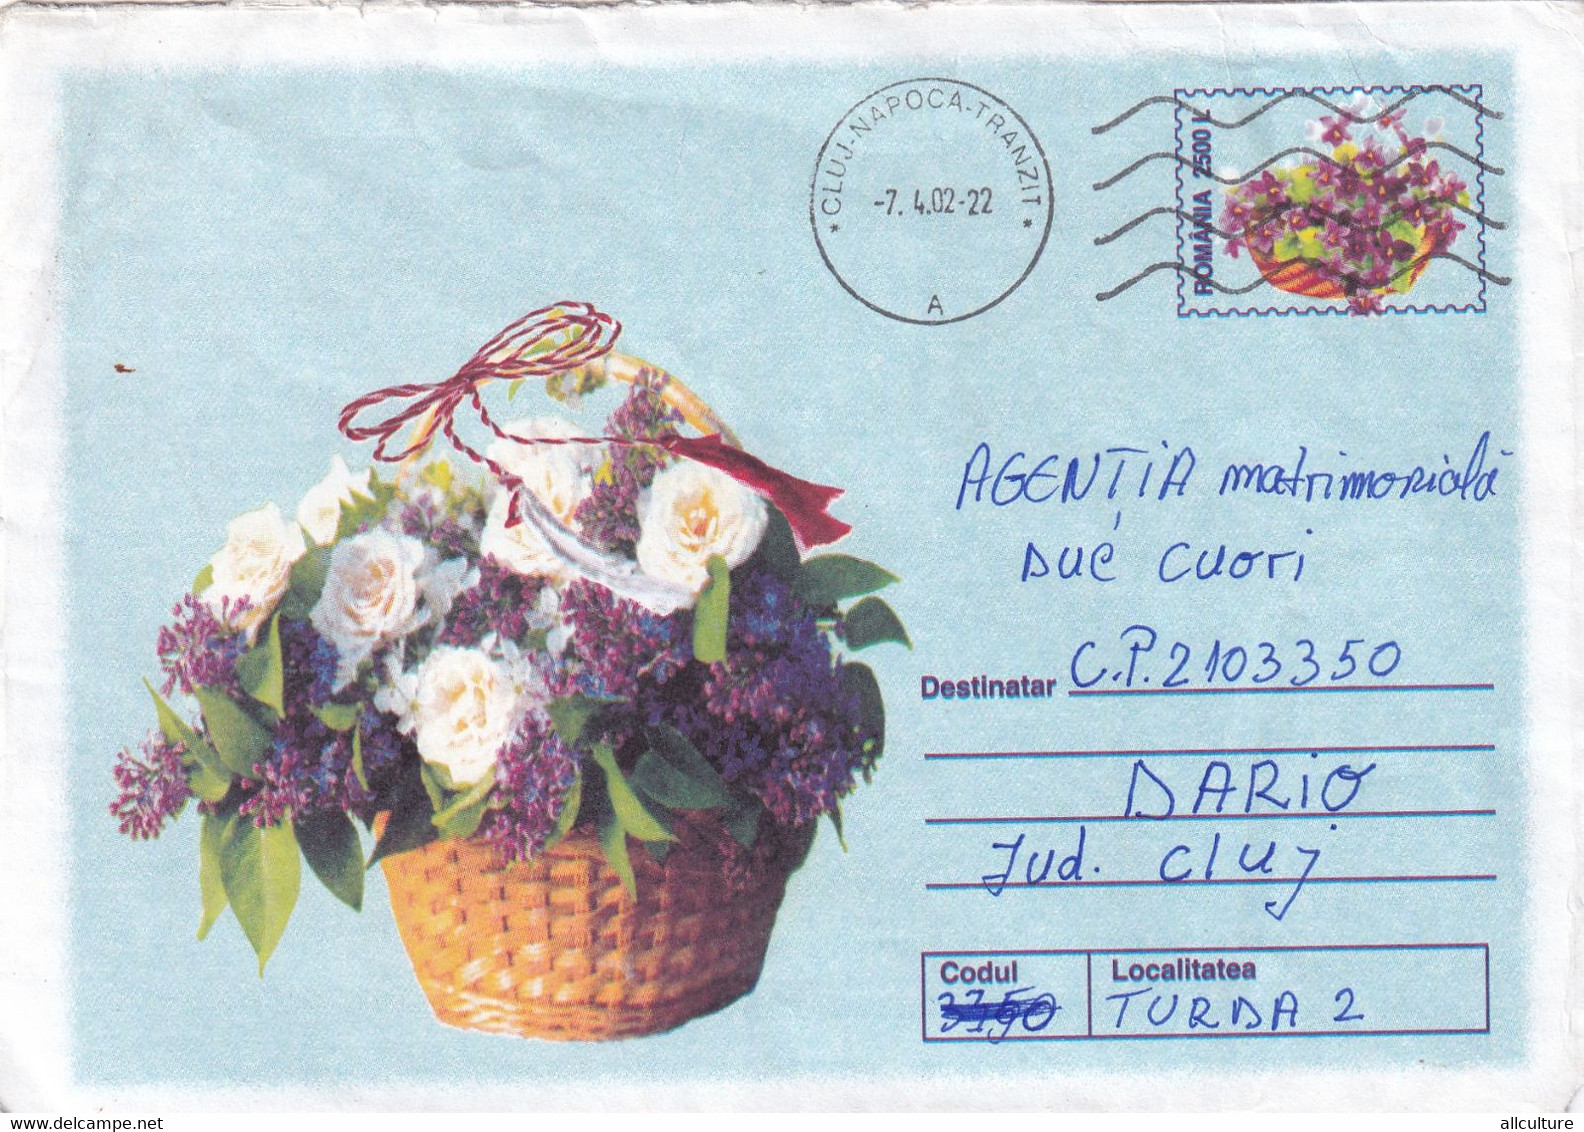 A9614- BOUQUET OF ROSES AND LILAC FLOWERS IN THE BASKET,CLUJ NAPOCA 2002 SENT TO TURDA, ROMANIA COVER STATIONERY - Rozen